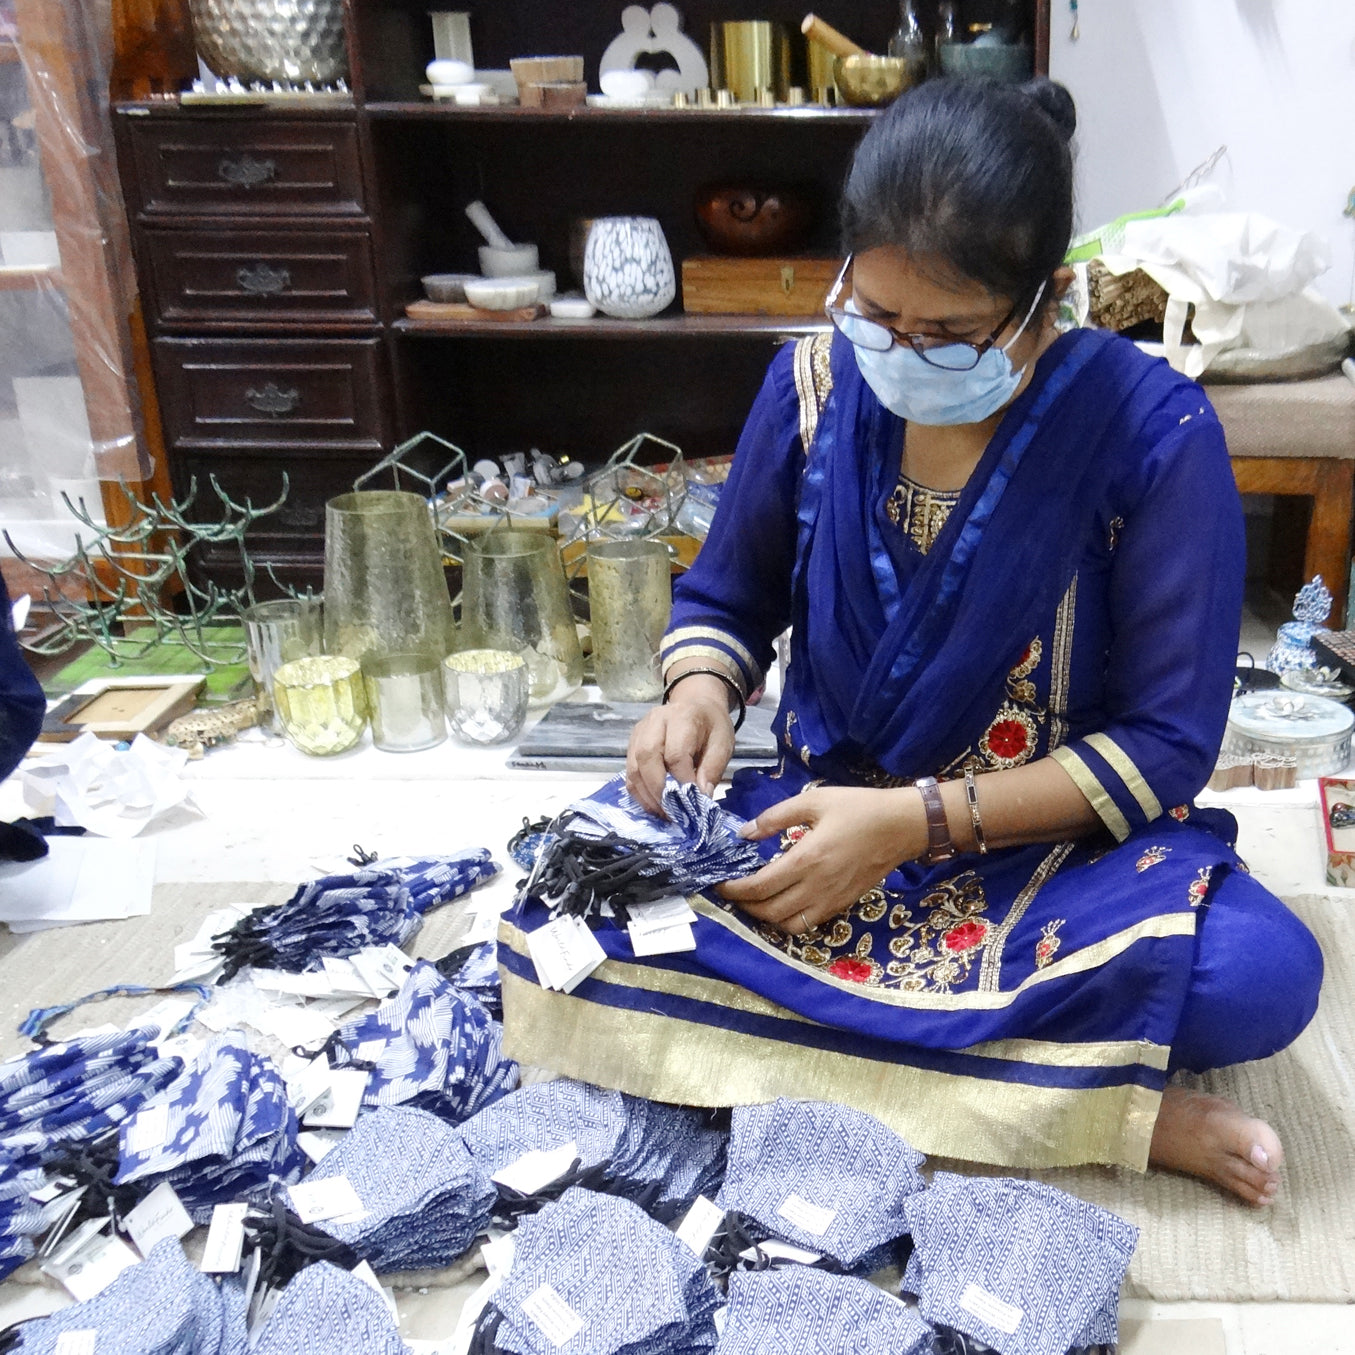 A woman artisan counts masks while sitting on the floor